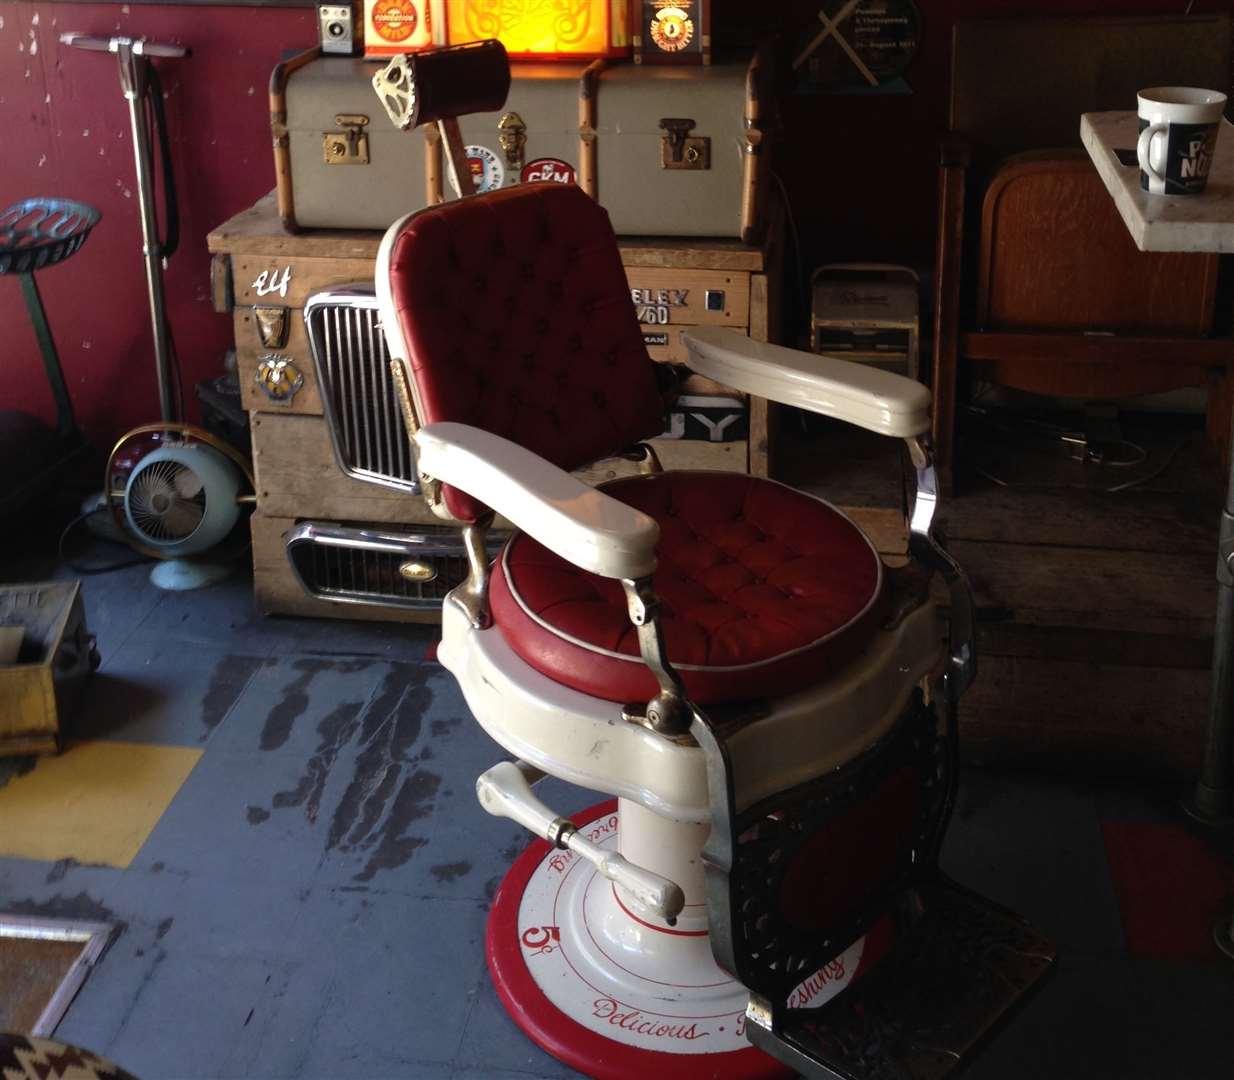 You can perch on an old barber chair while sipping your cider